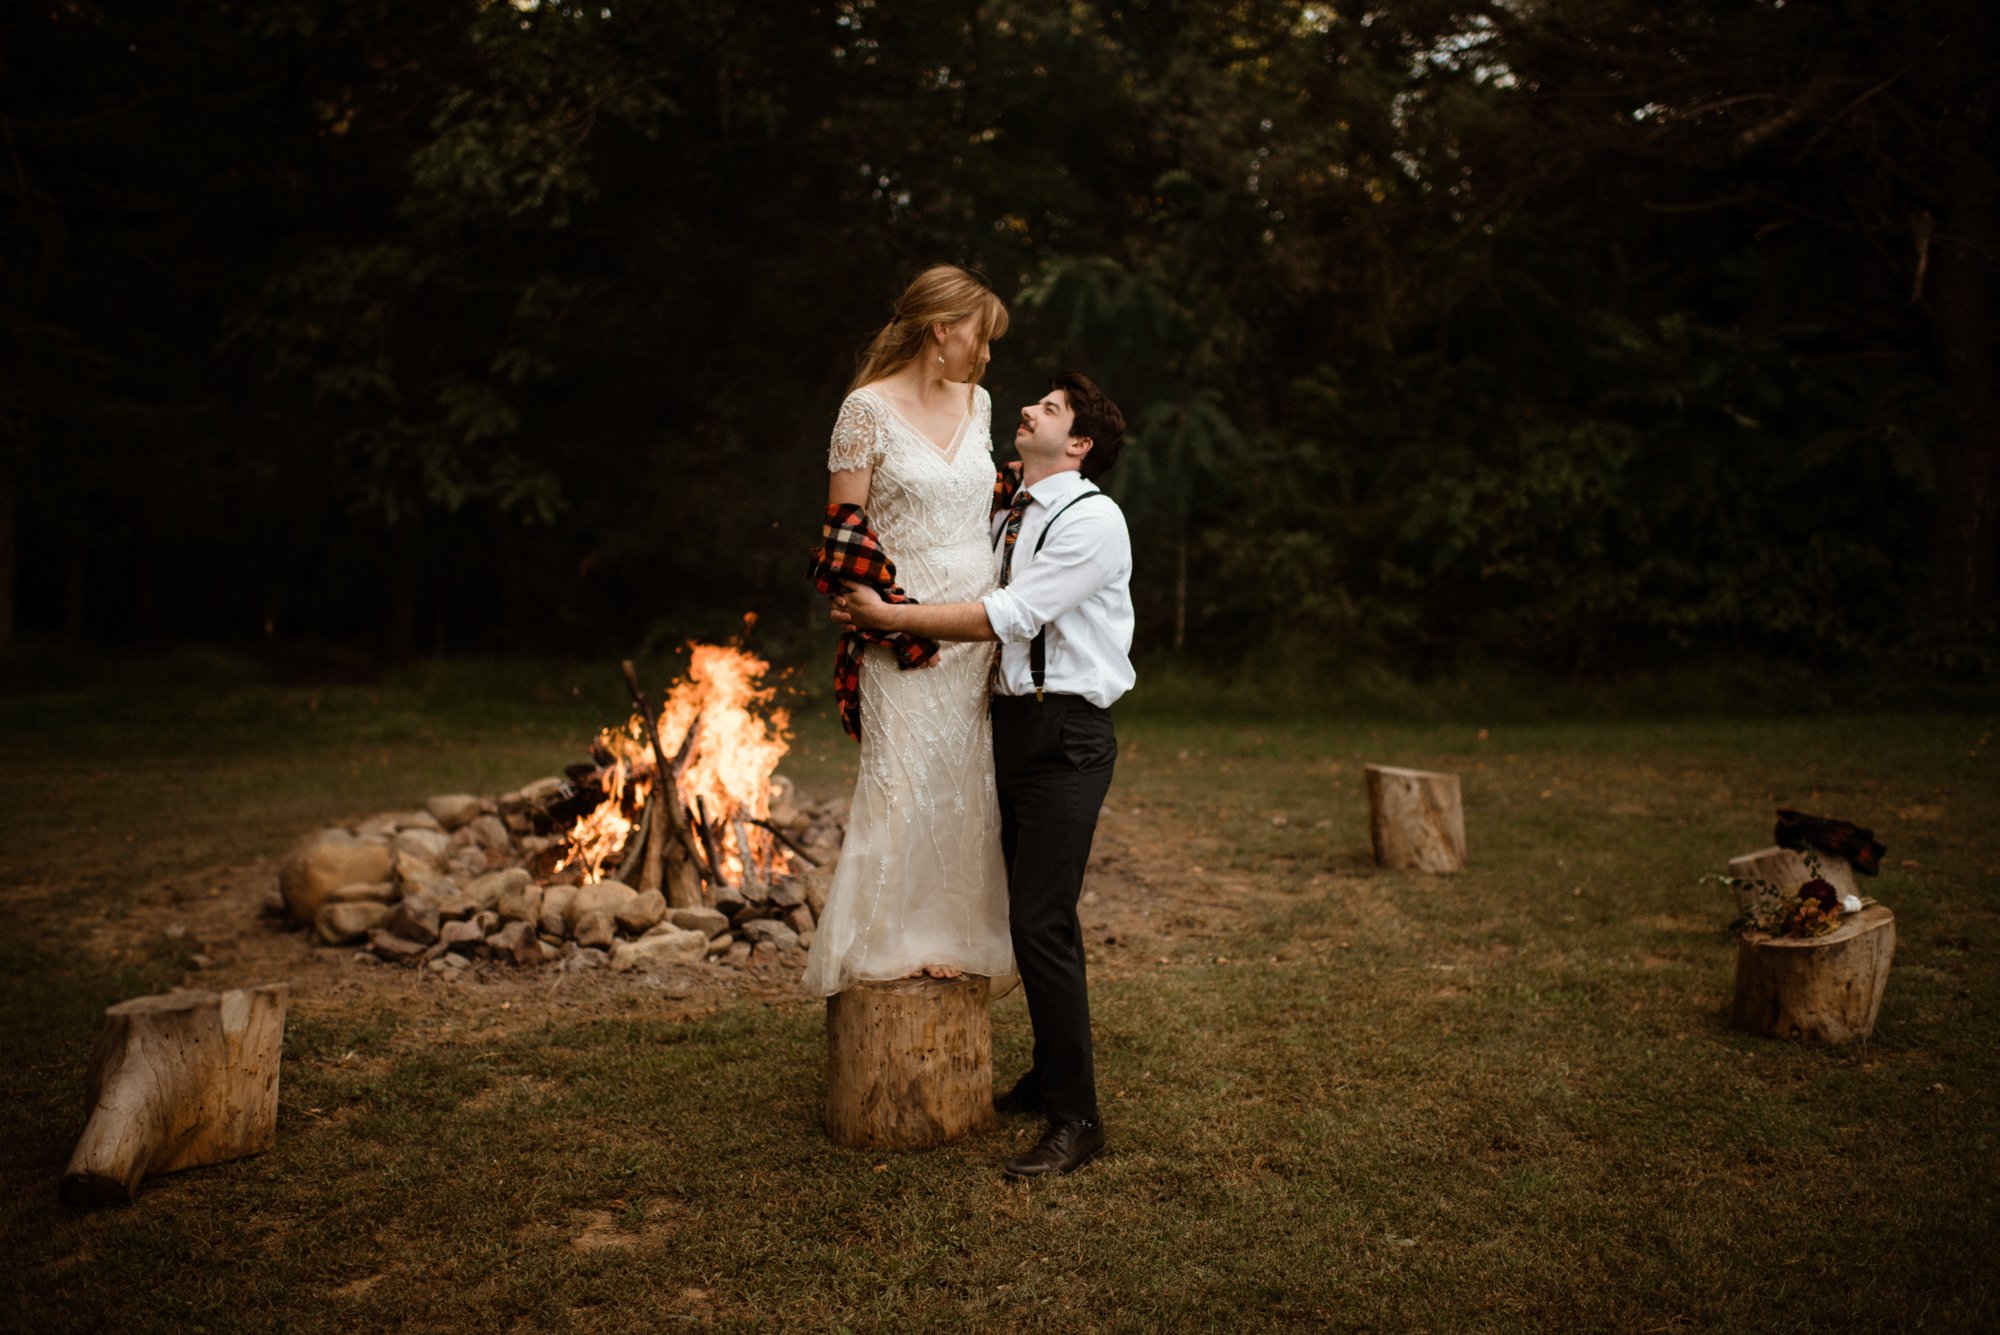 Sill and Glade Cabin Elopement in Virginia - Mountain Airbnb Elopement - White Sails Creative - Blue Ridge Mountains Elopement Cabin Inspiration_22.jpg